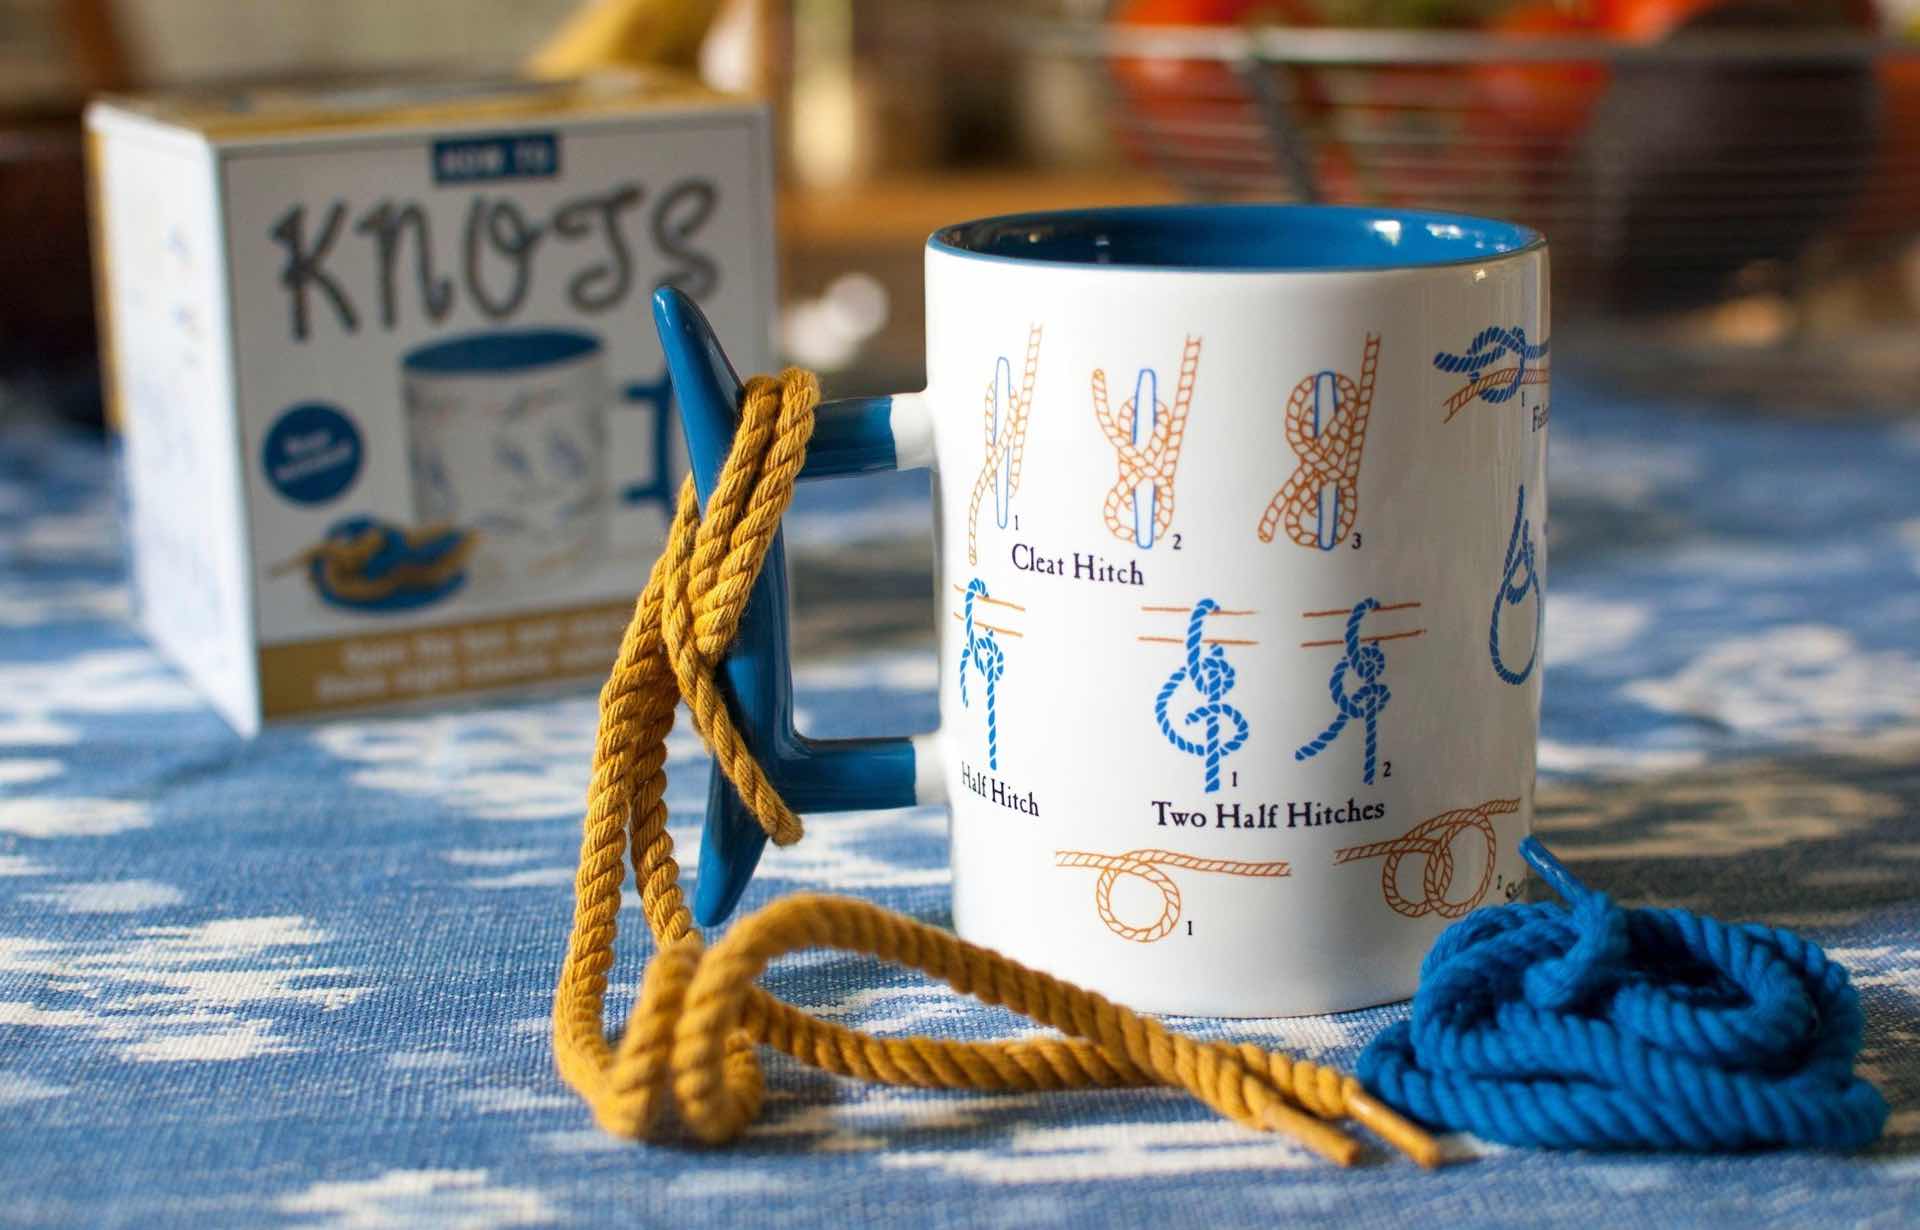 unemployed-philosphers-guild-how-to-tie-knots-coffee-mug